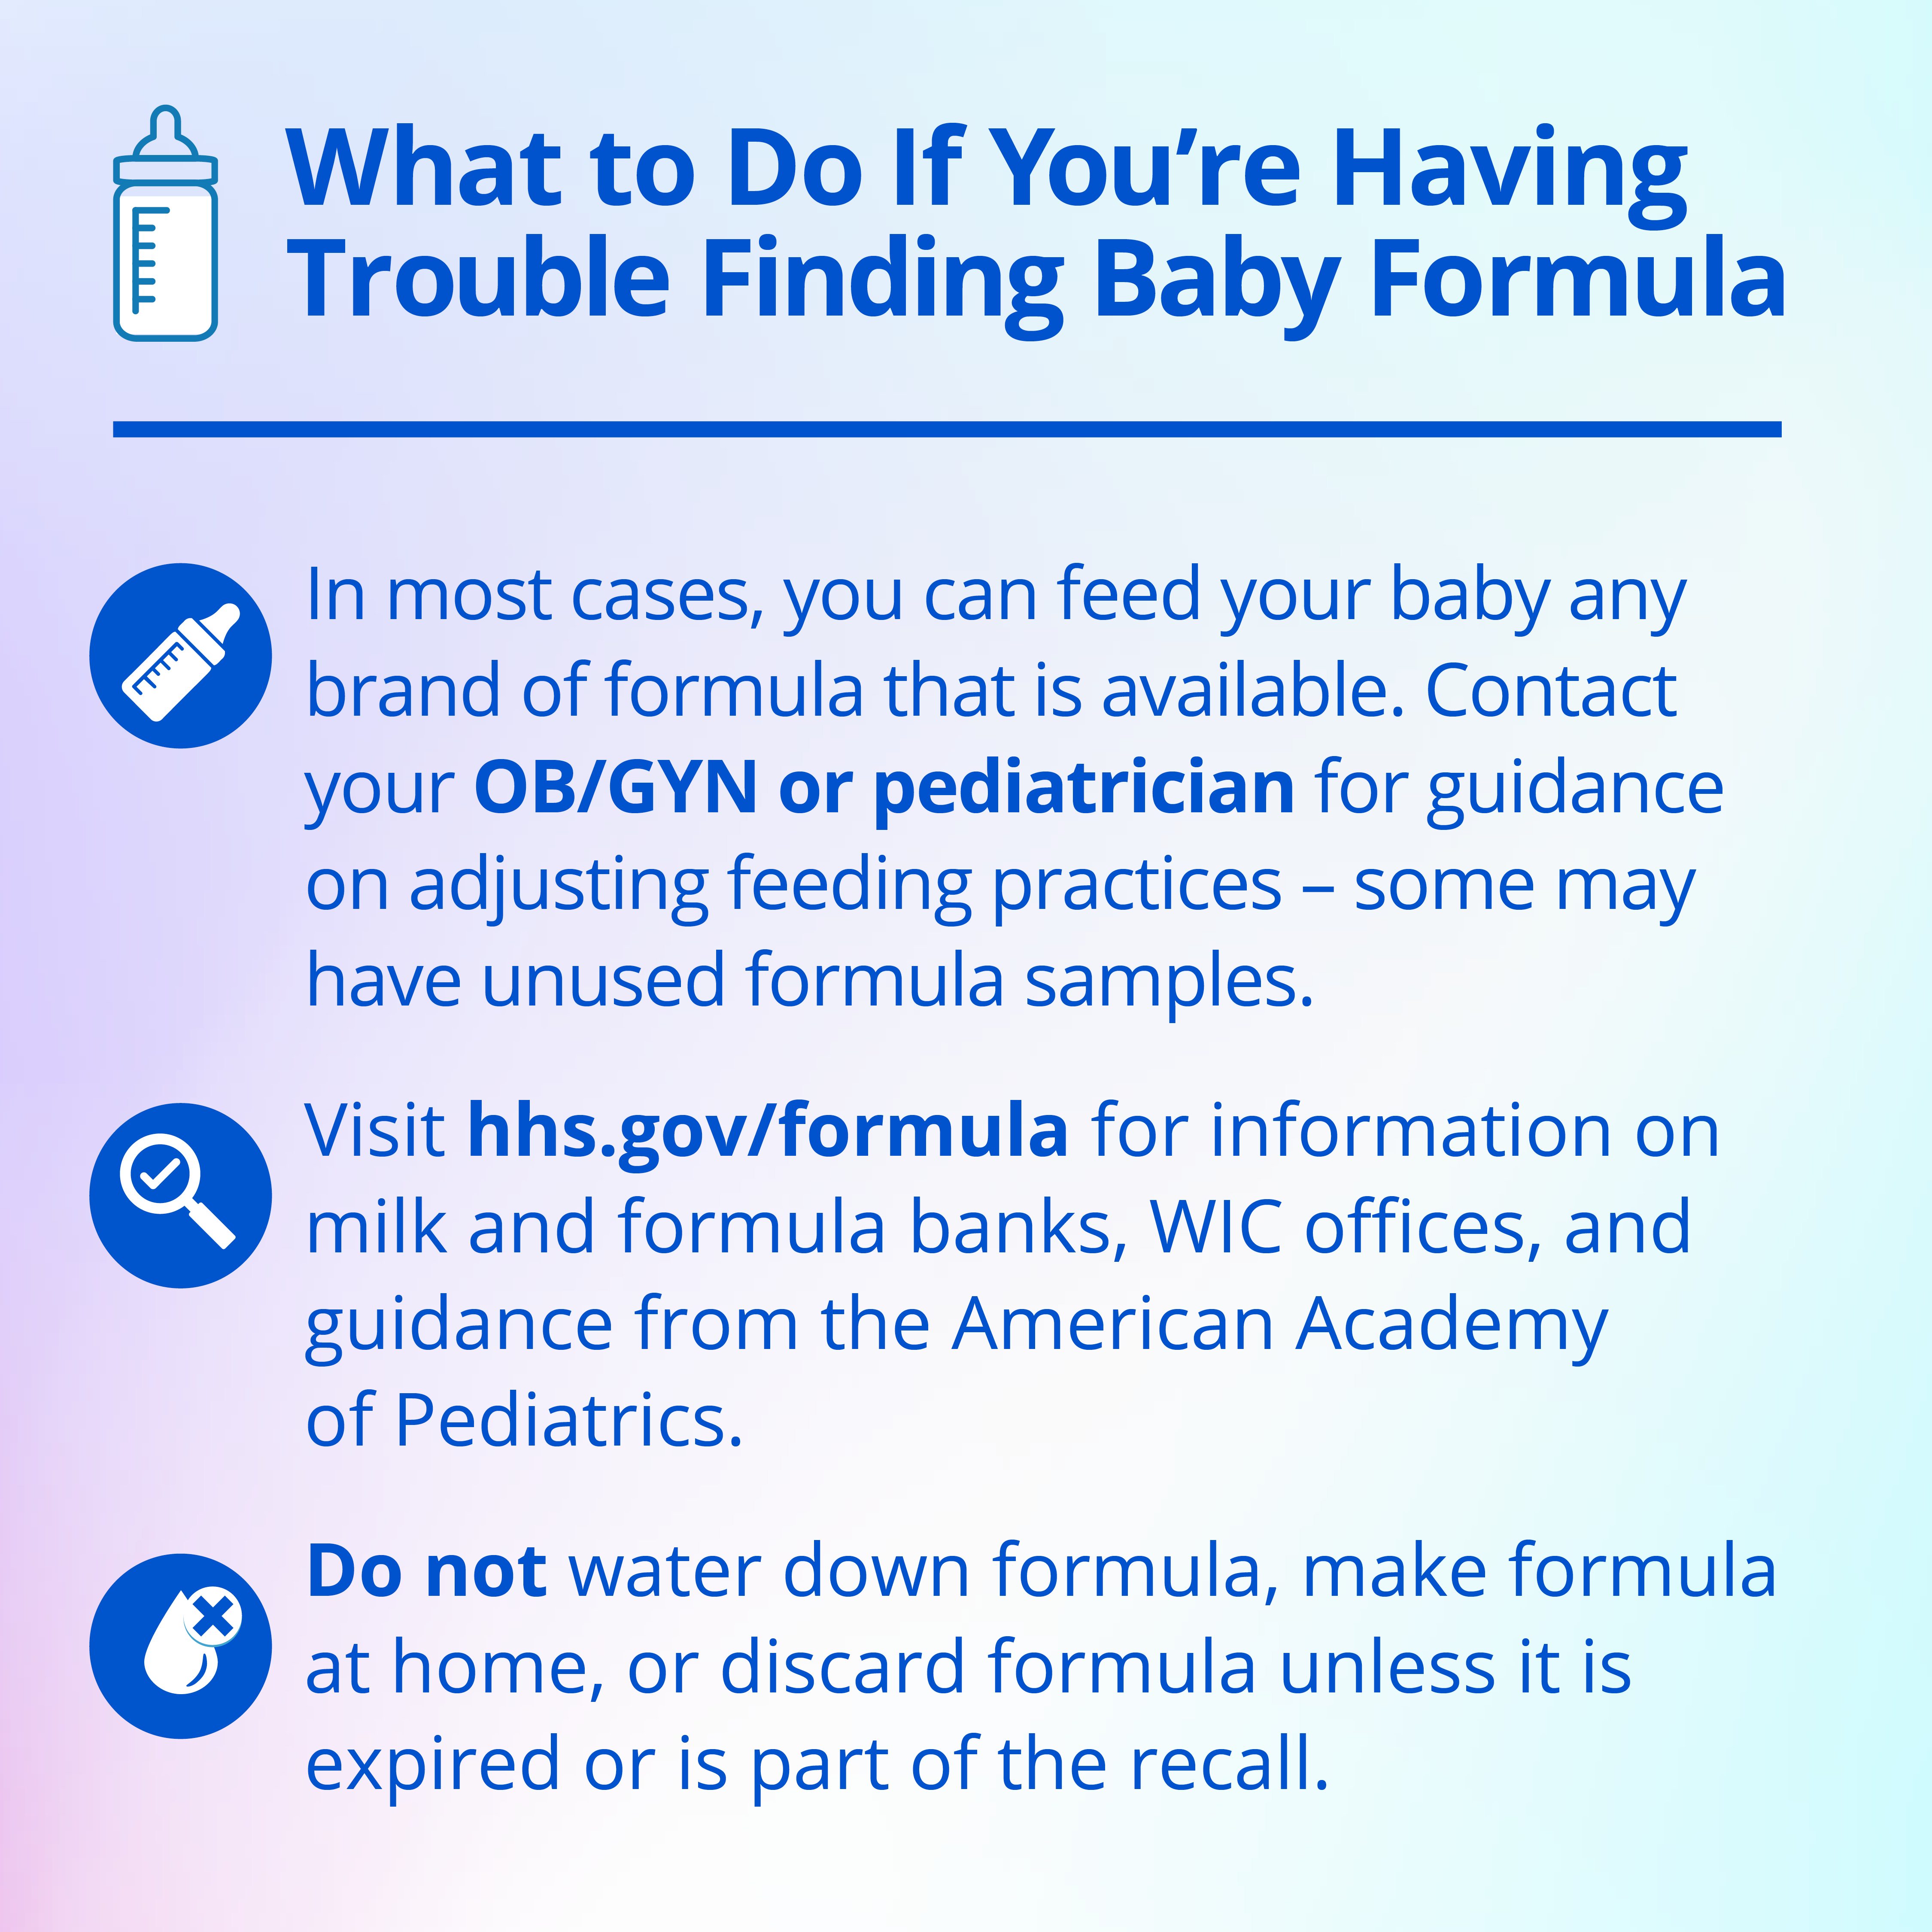 Instagram graphic explaining in English what to do if you're having trouble finding baby formula. In most cases, you can feed you baby any brand of formula that is available. Contact your OB/GYN or pediatrician for guidance on adjusting feeding practices - some may have unused formula samples. Second, visit hhs.gov/formula for information on milk and formula banks, WIC offices, and guidance from the American Academy of Pediatrics. Third, do not water down formula, make formula at home, or discard formula unless it is expired or is part of the recall.